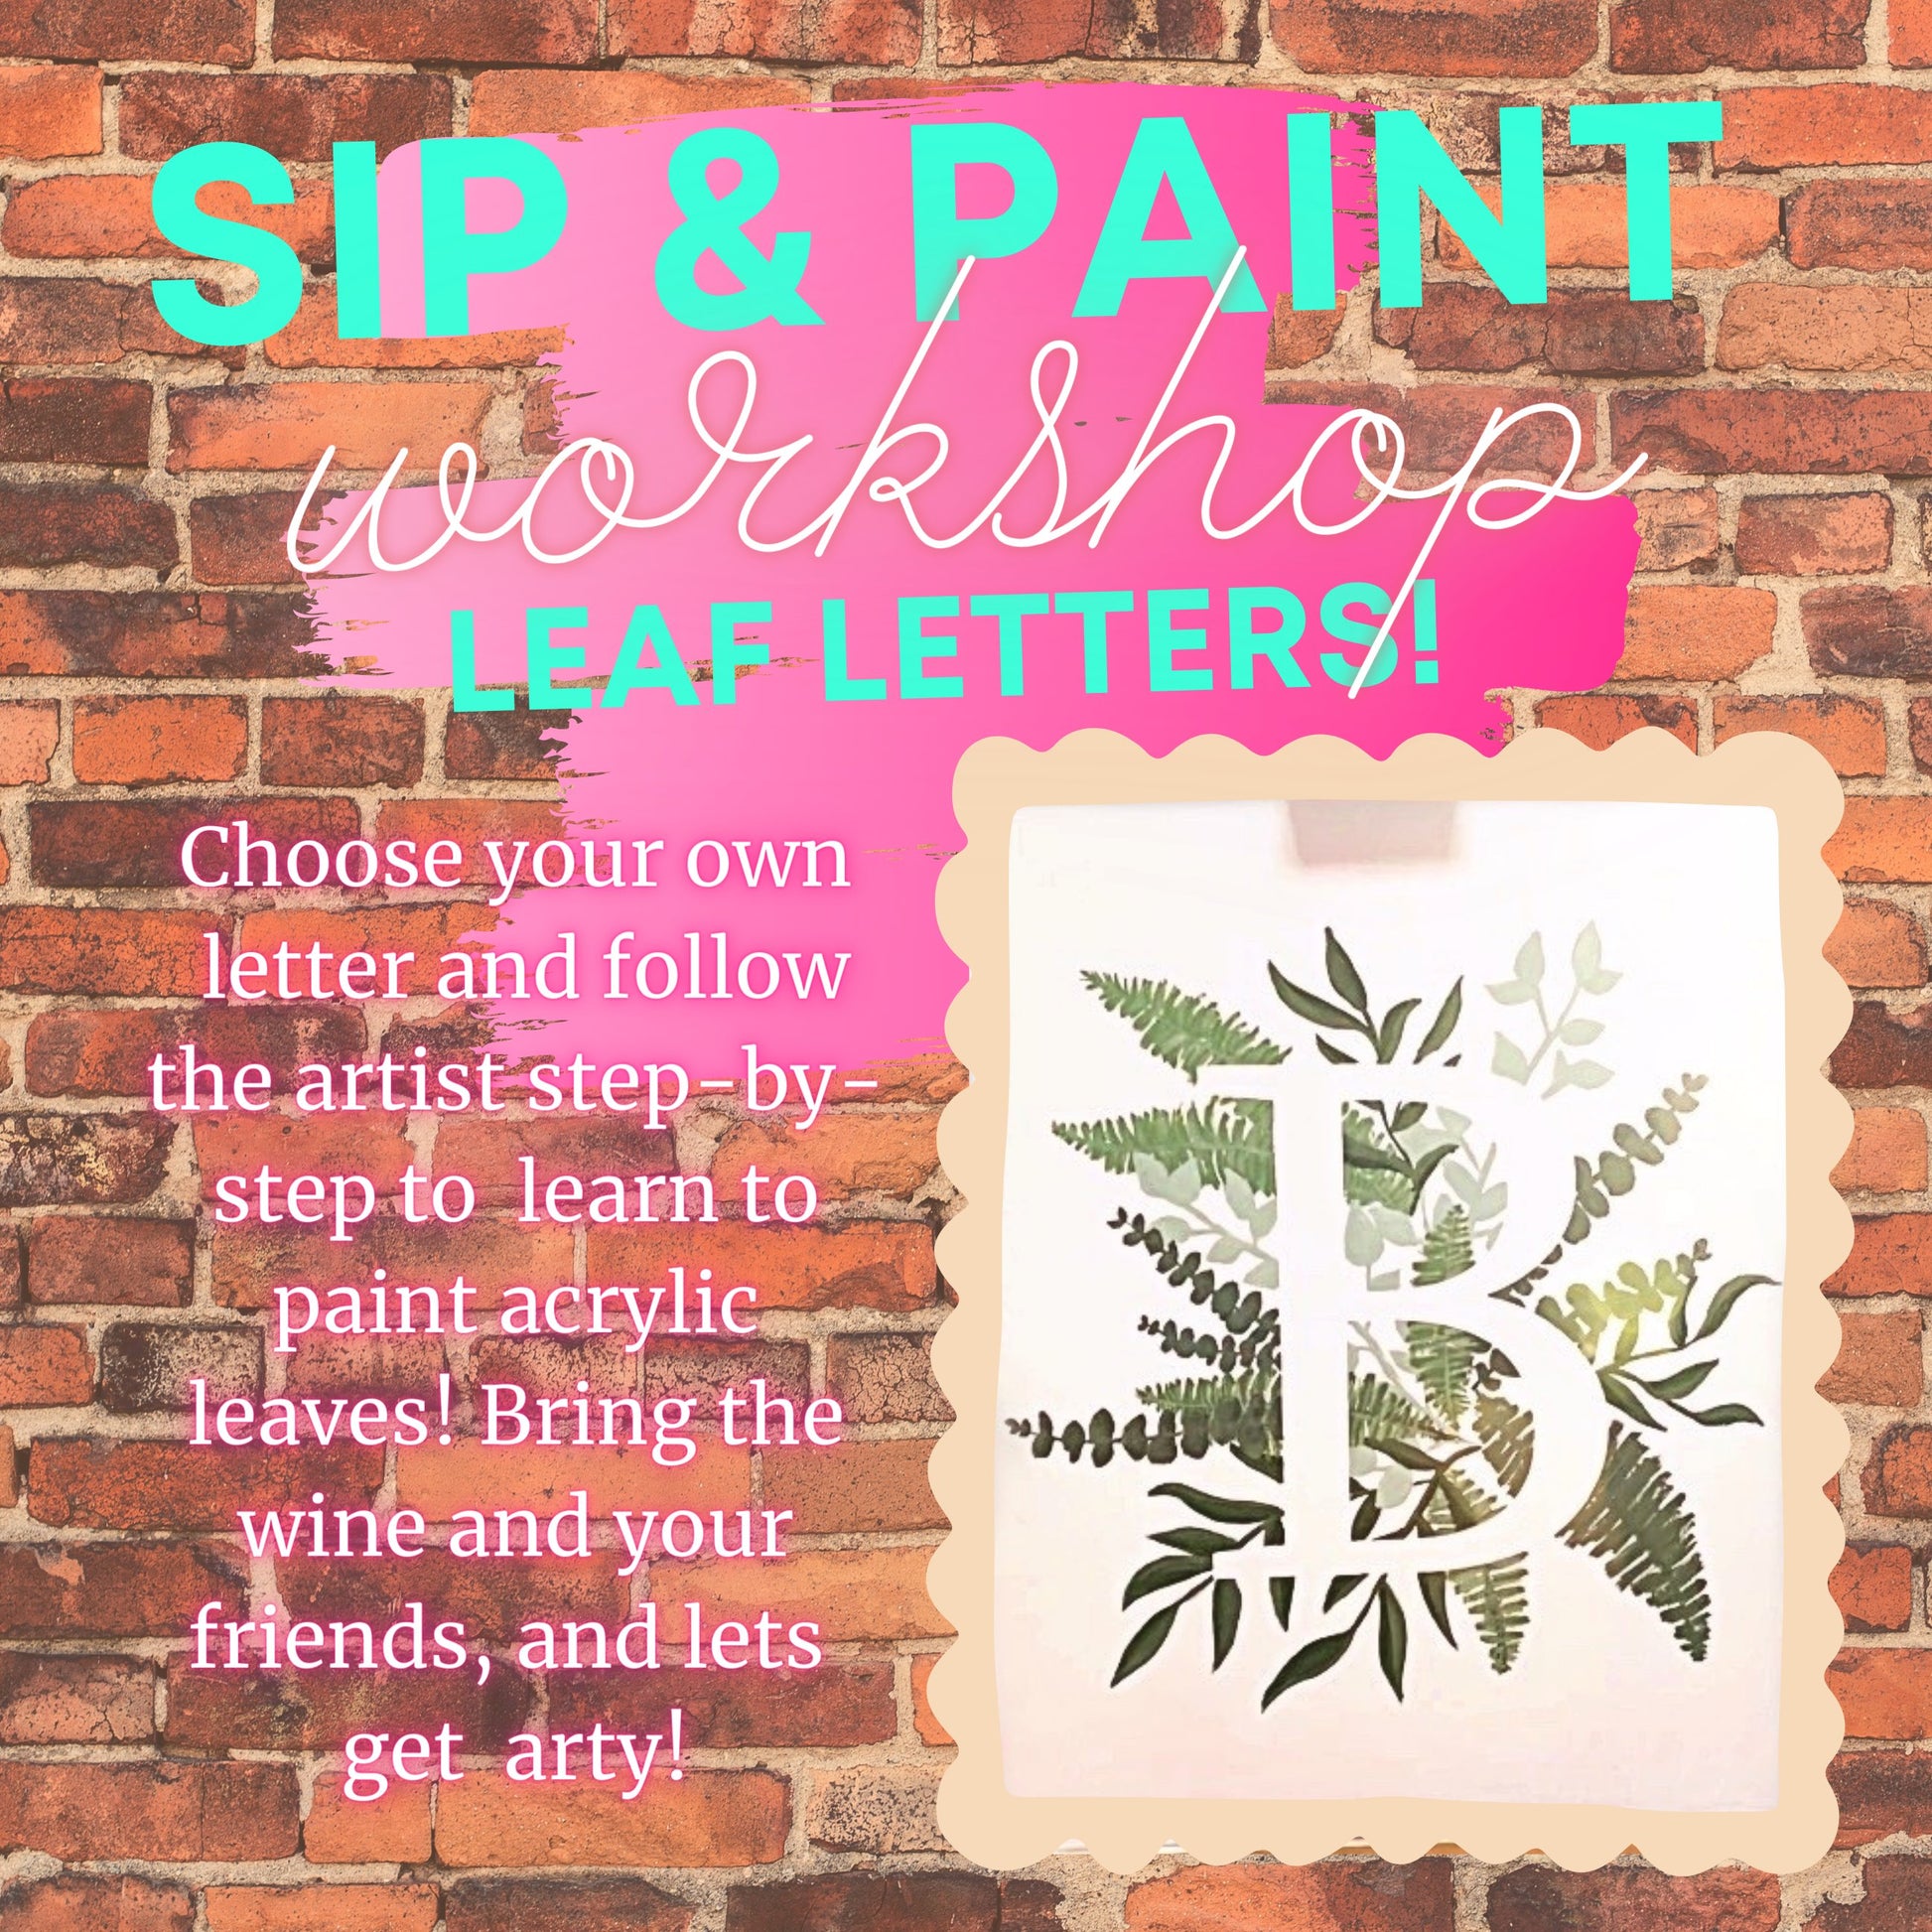 sip and acrylic paint workshop in brisbane